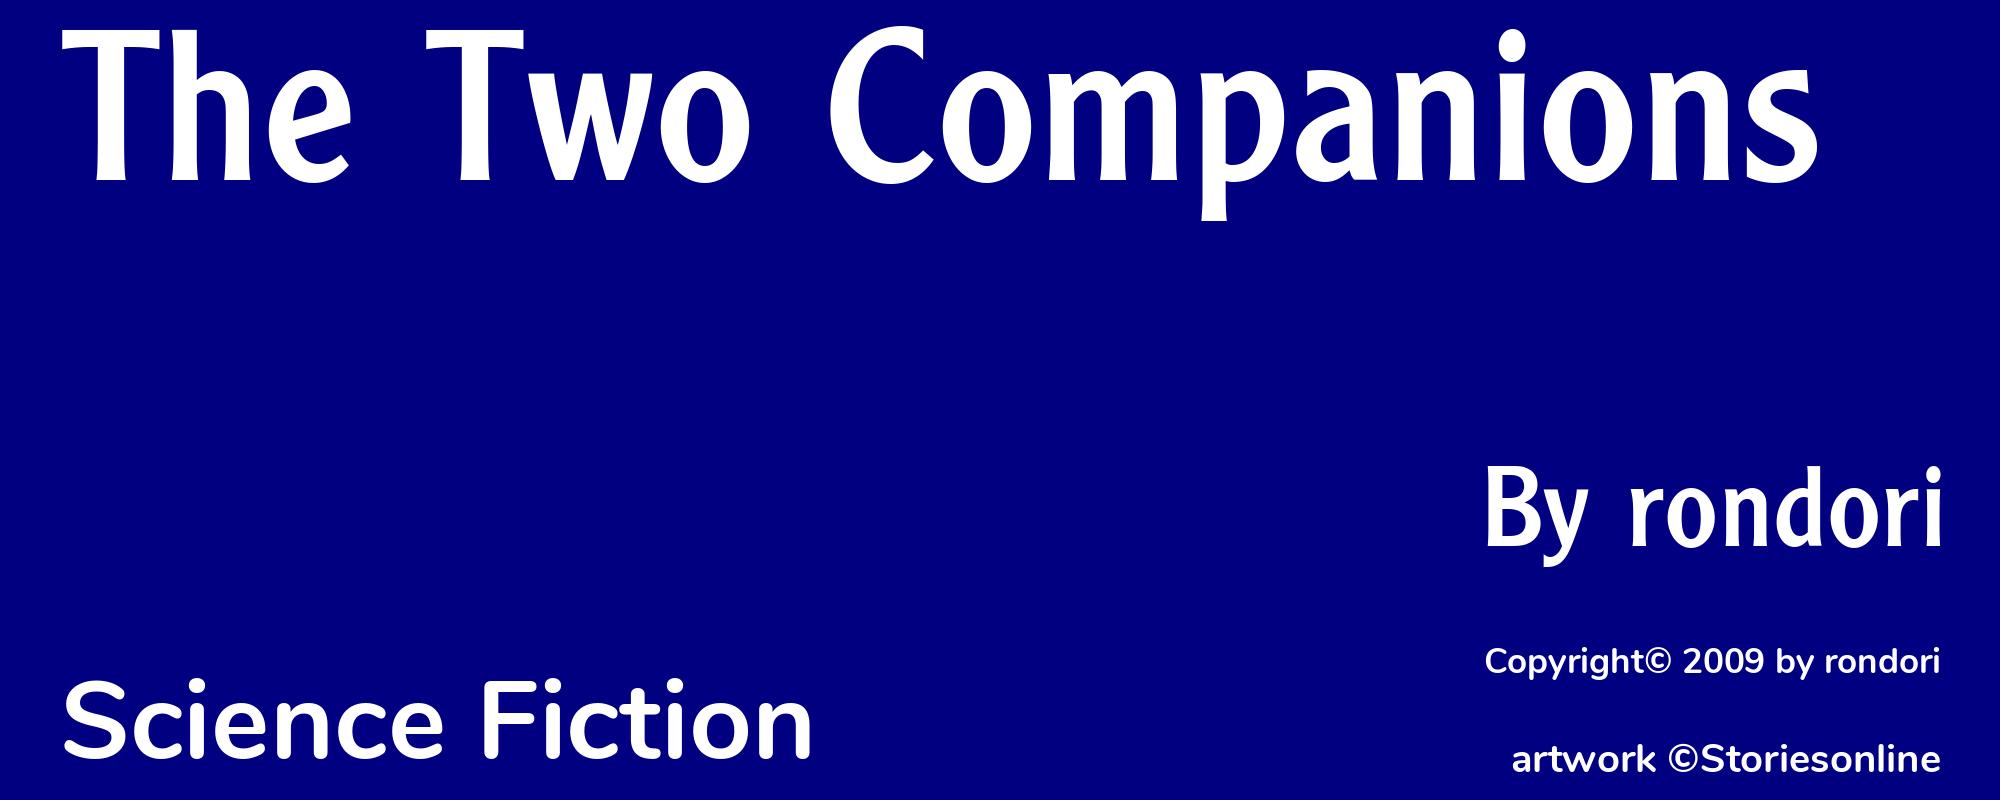 The Two Companions - Cover